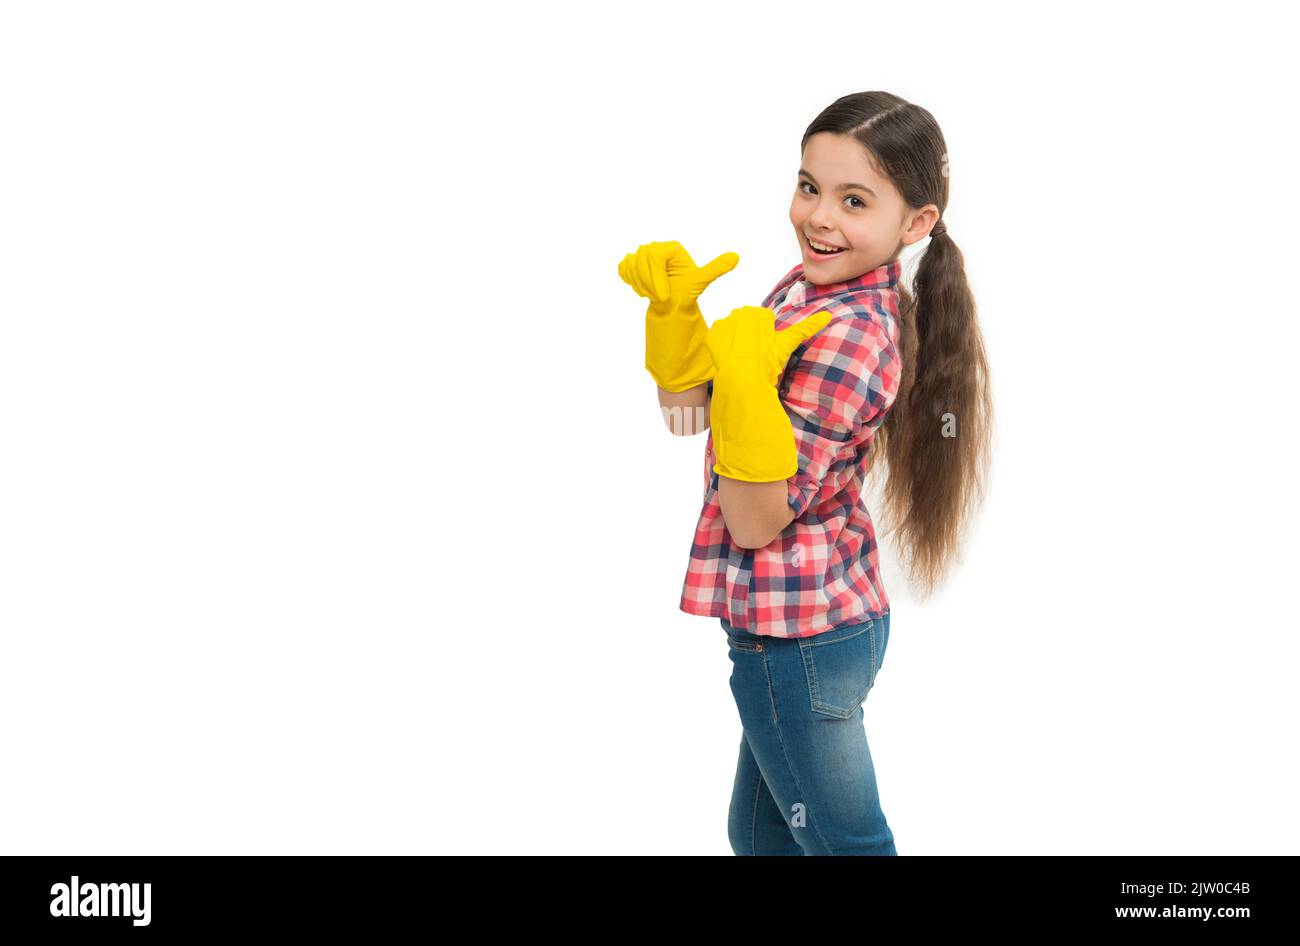 well done. Cleaning supplies advertisement. small girl cleaning in rubber gloves. kid clean house in latex gloves. Yellow gloves for cleaning the Stock Photo